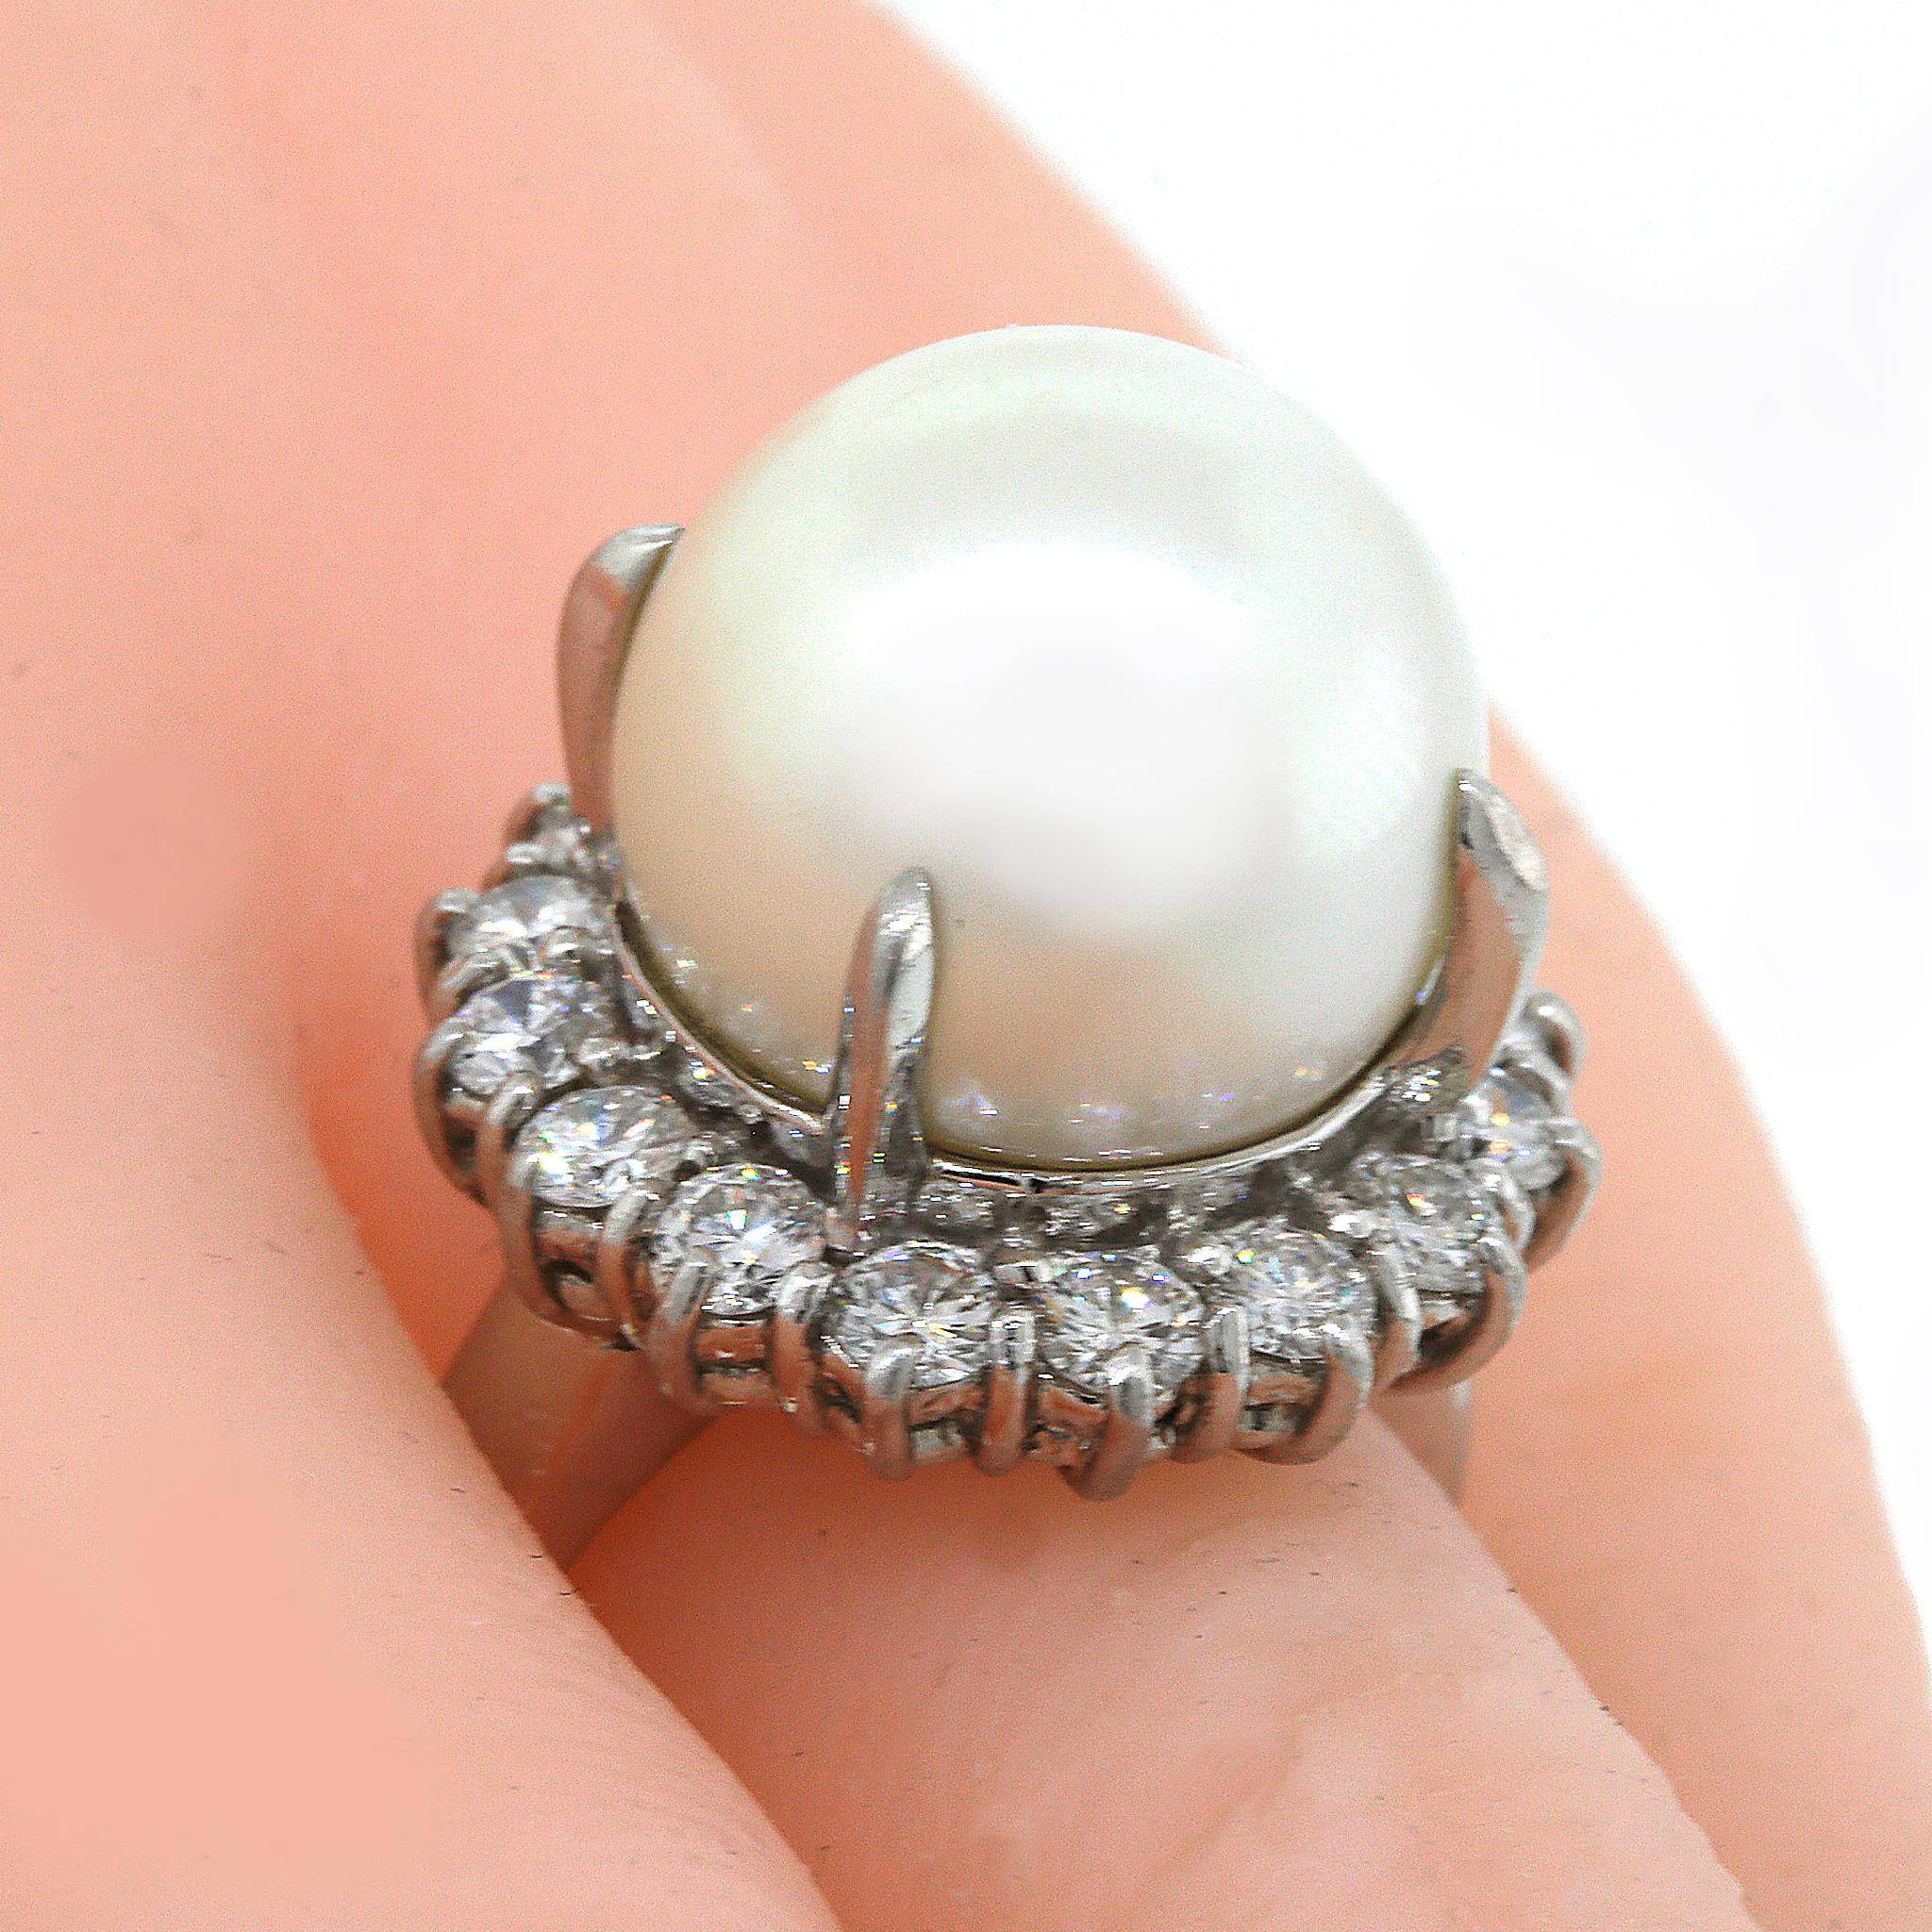 Platinum
Diamond: 1.36 ct twd
South Sea Pearl: 14 mm
Ring Size: 5.75
Total Weight: 18.6 grams